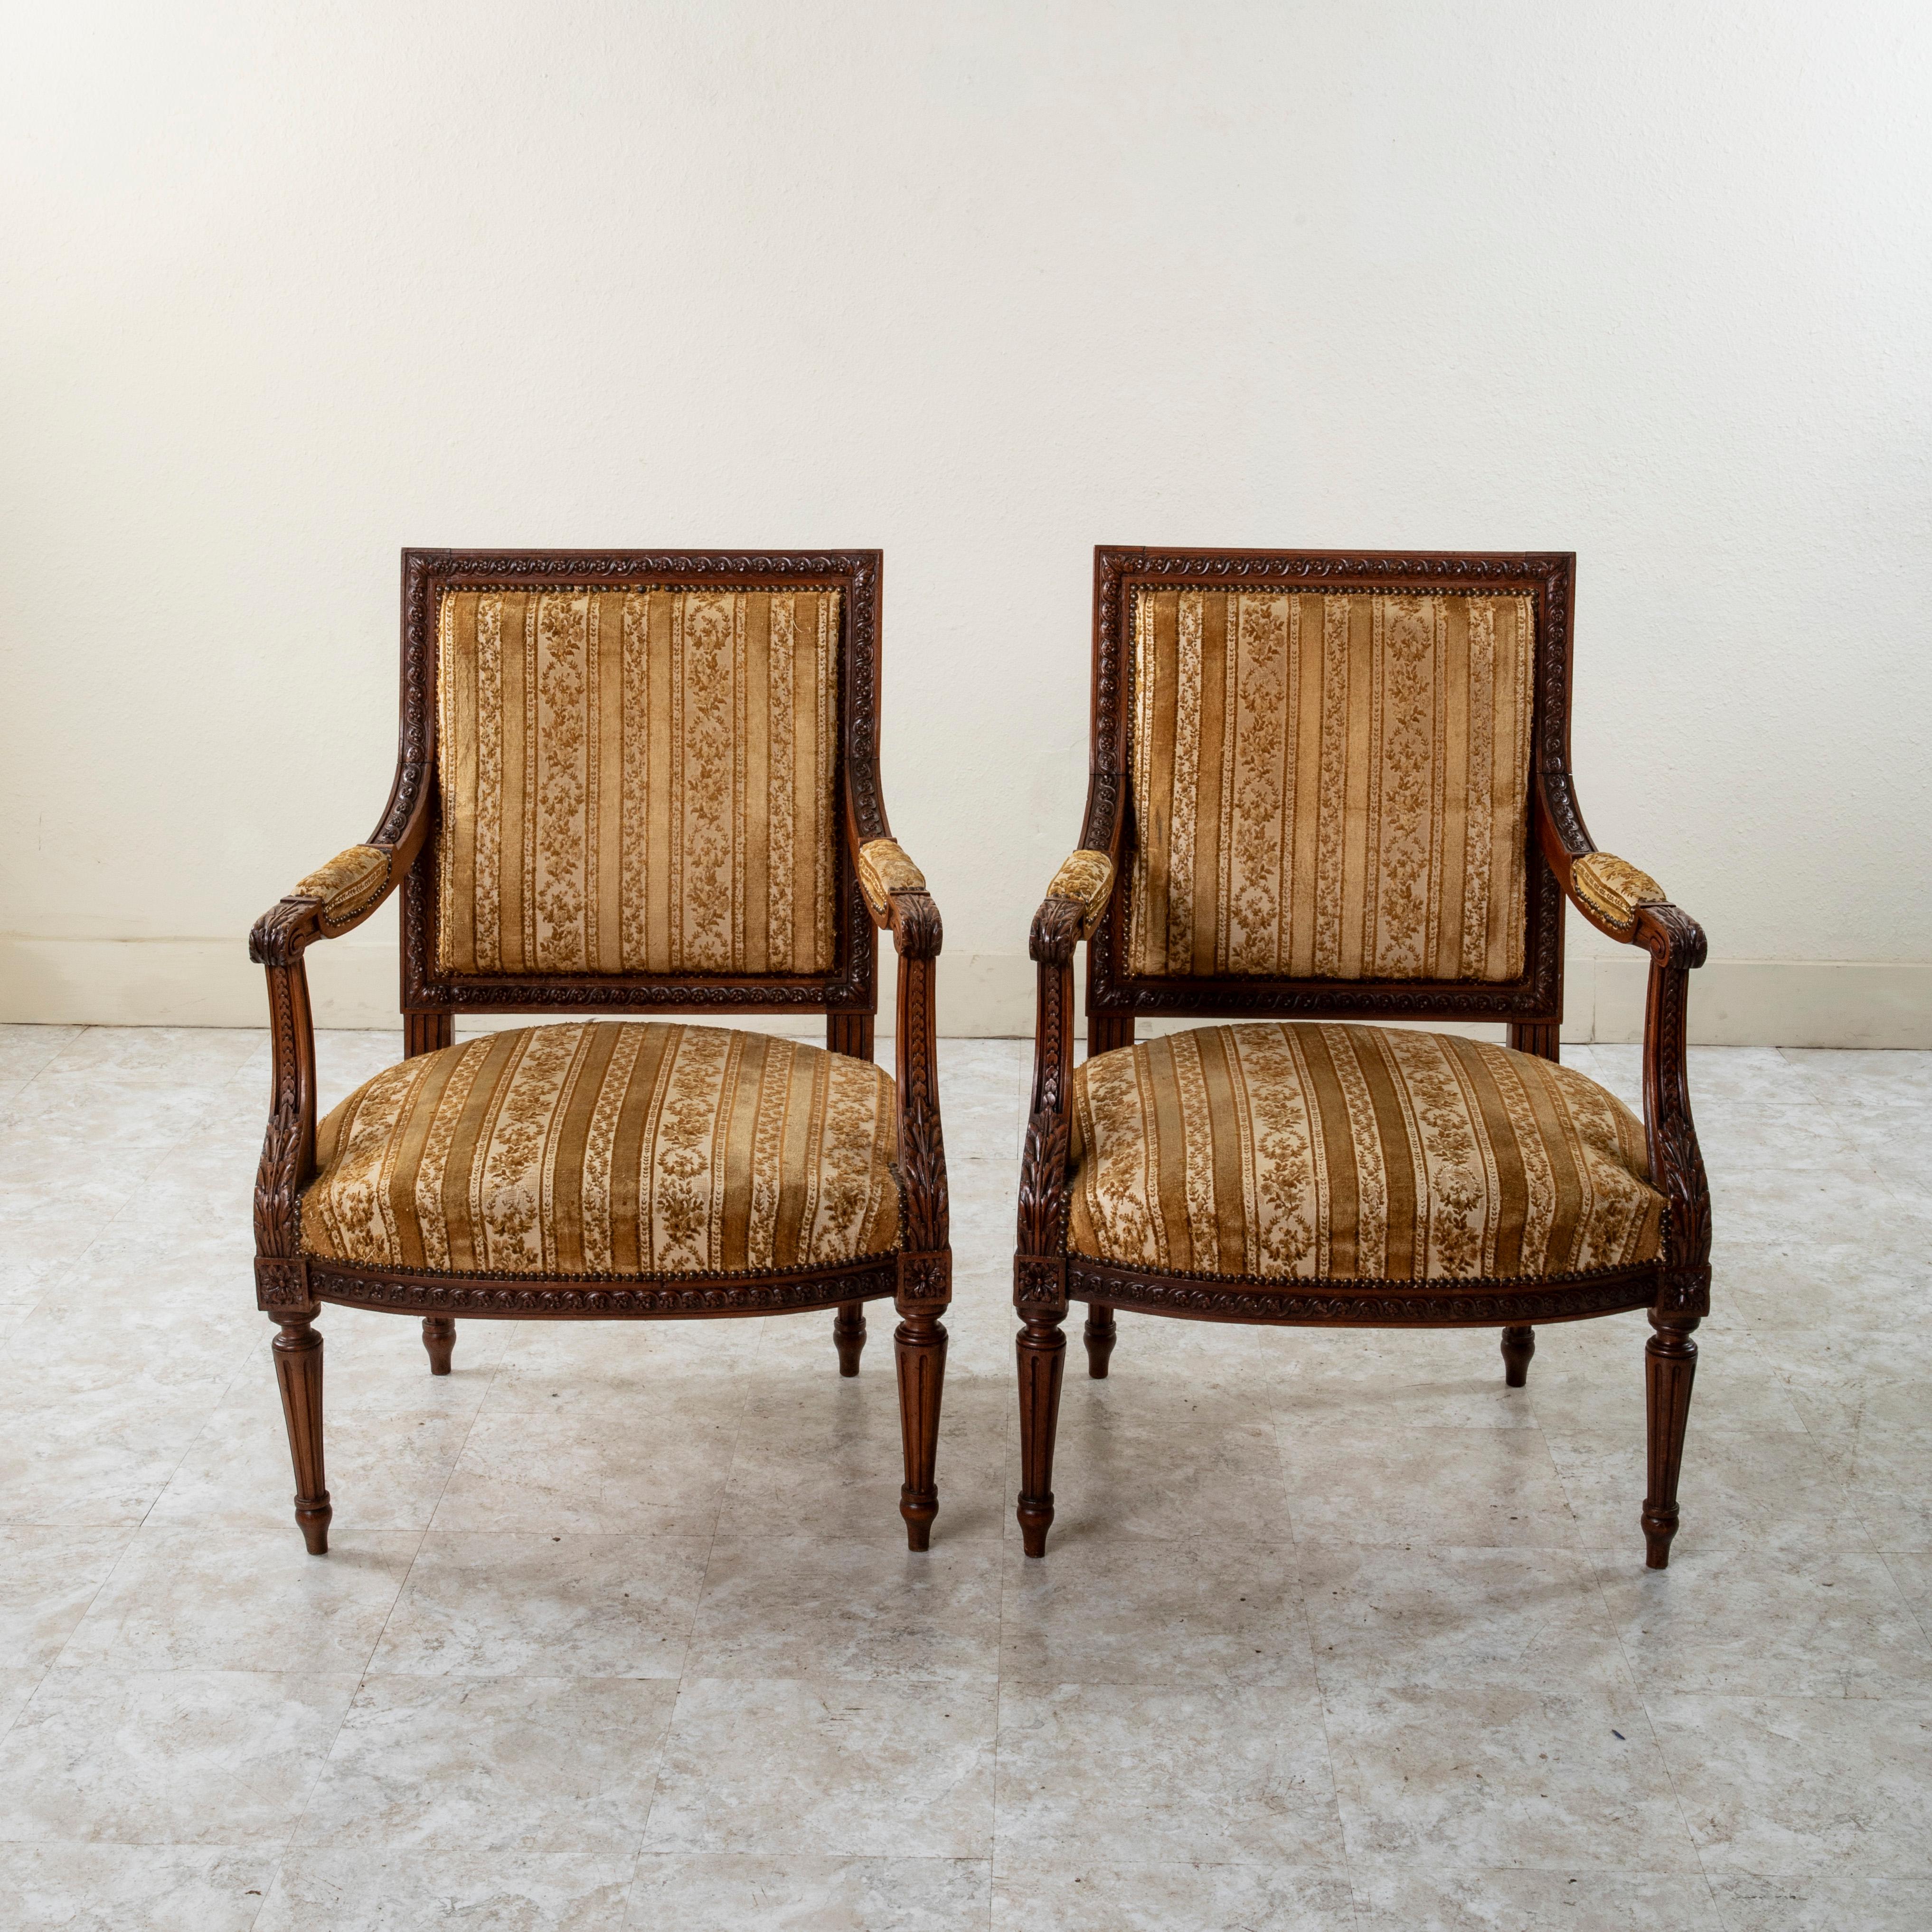 This pair of late nineteenth century French Louis XVI style armchairs is constructed of solid walnut. Their beautifully hand carved details includes classic motifs of an interlaced scrolling and floral pattern, acanthus leaves and overlapping